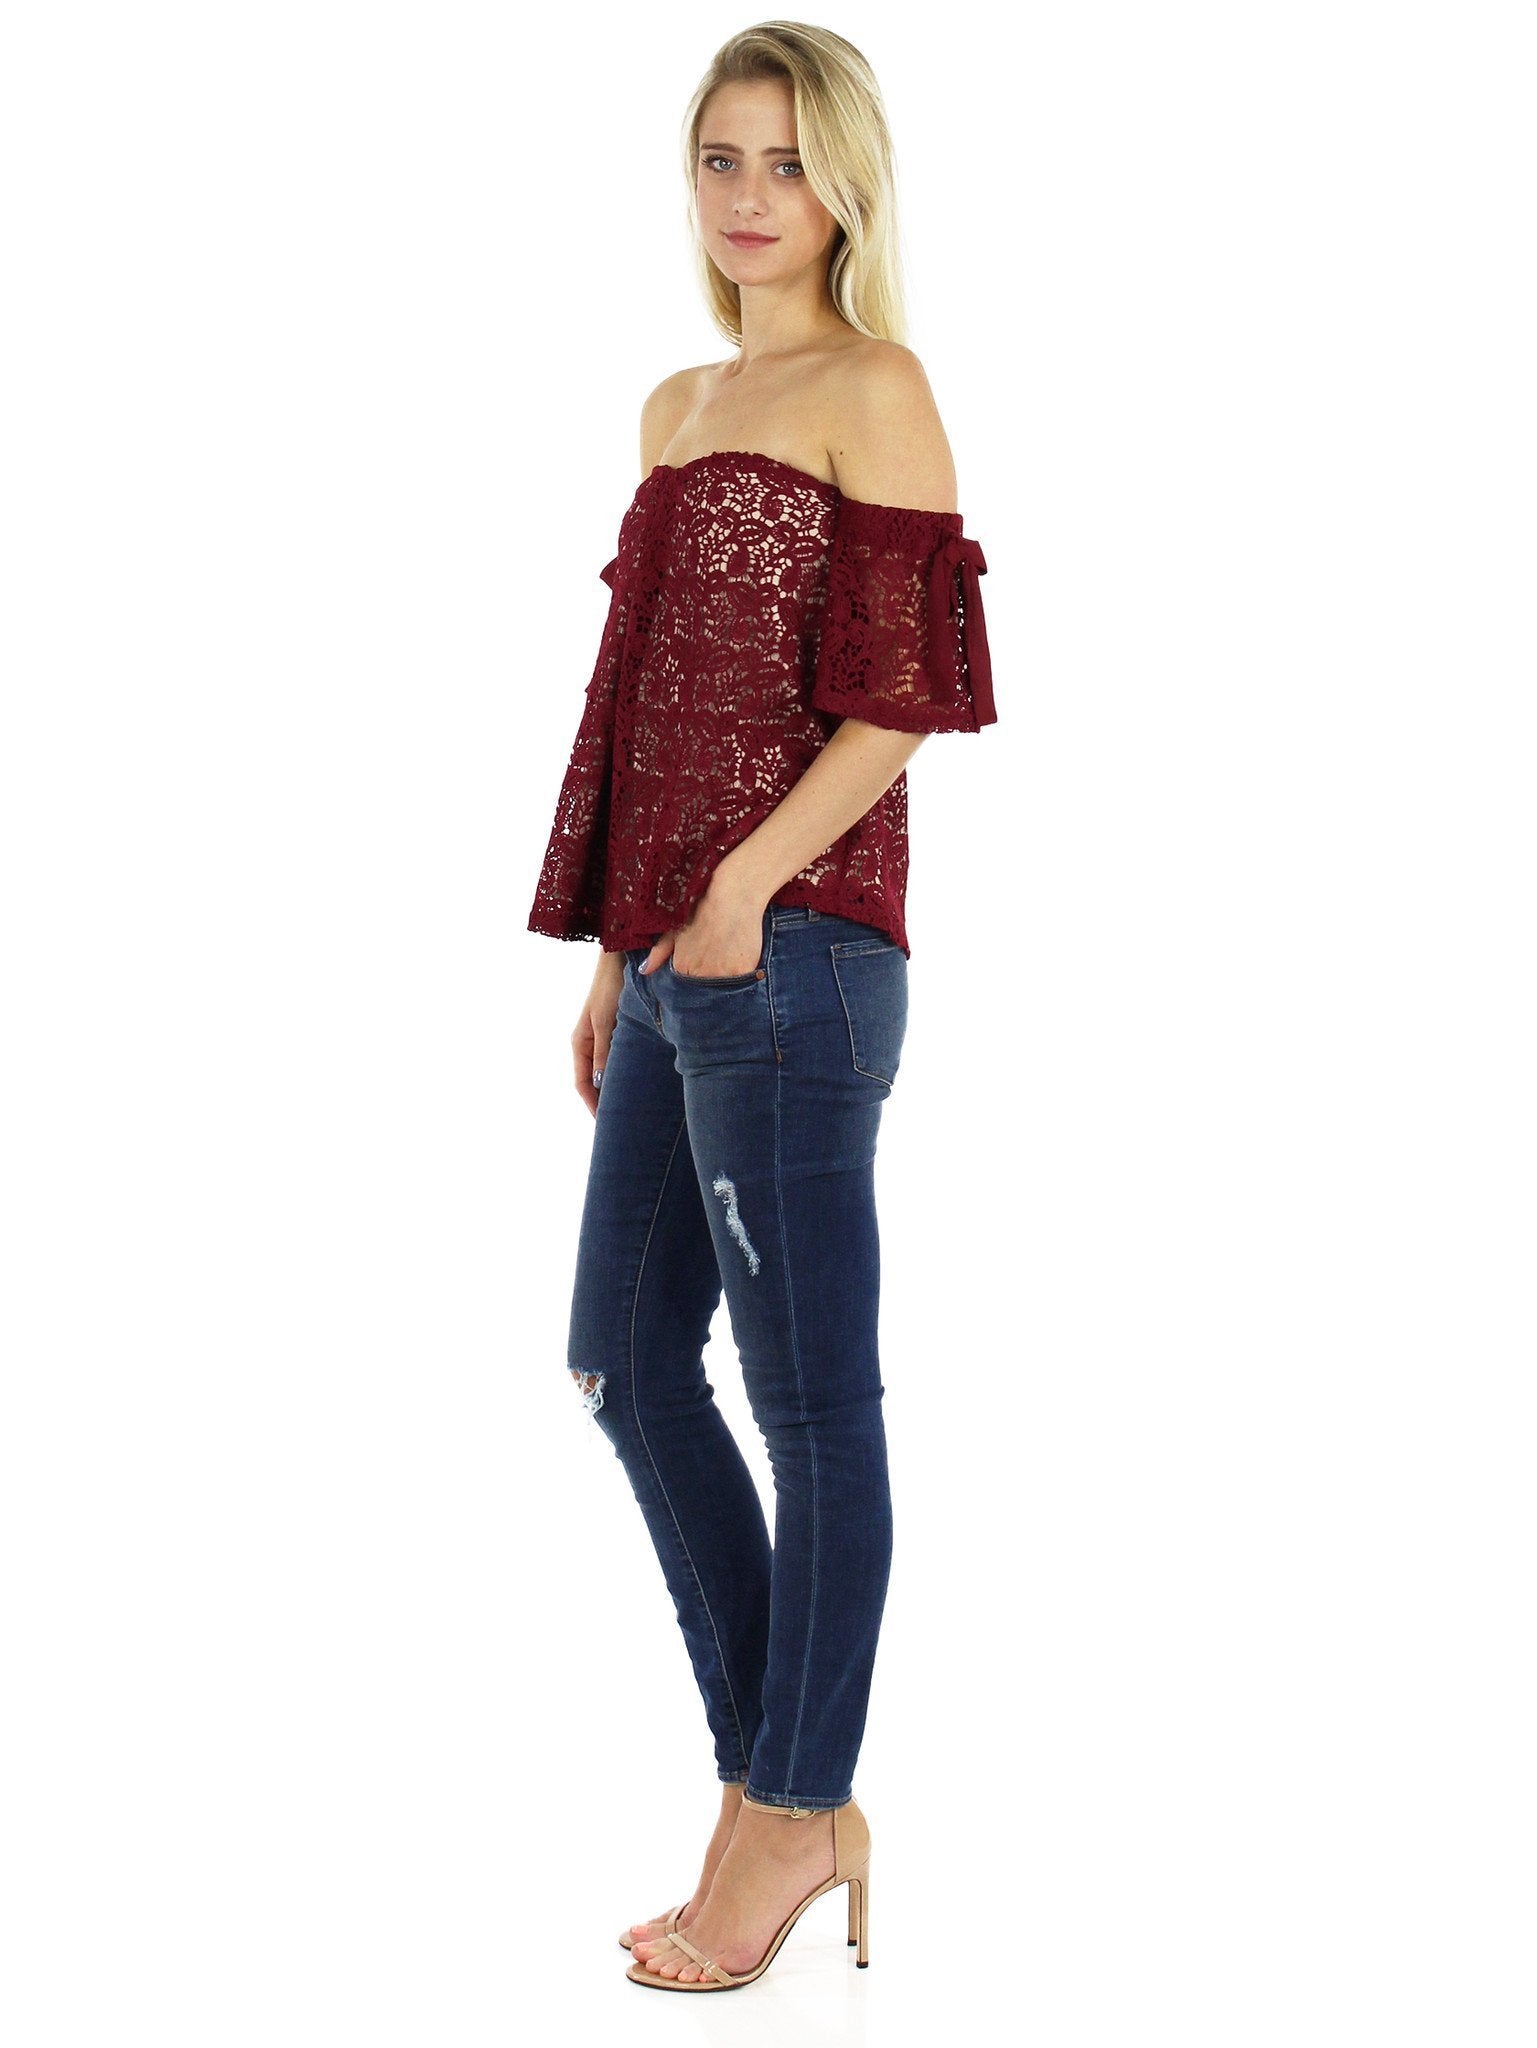 Women outfit in a top rental from Moon River called Off Shoulder Lace Top